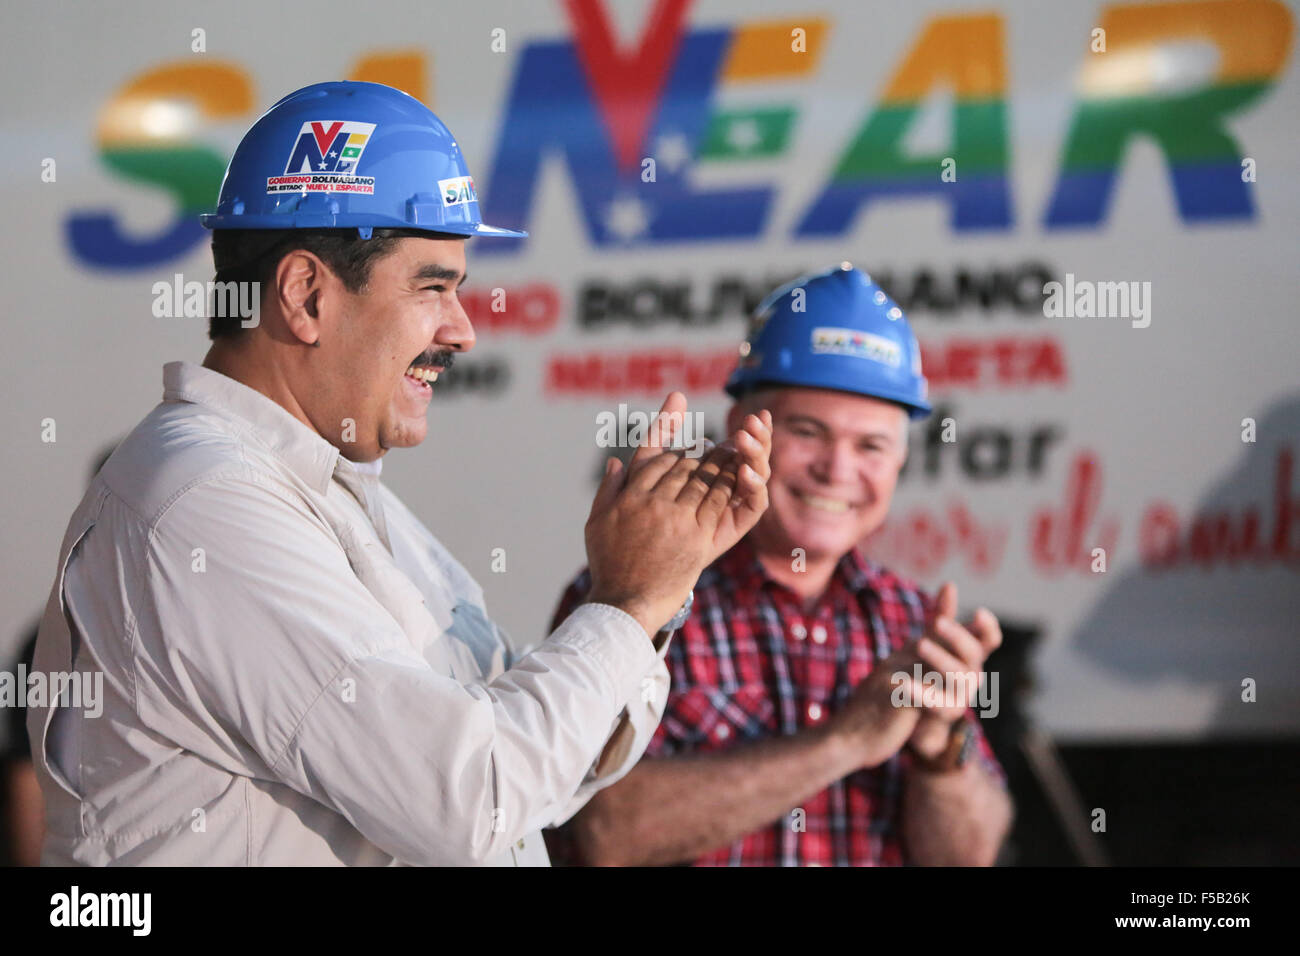 Nueva Esparta, Venezuela. 31st Oct, 2015. Image provided by Venezuela's Presidency shows Venezuelan President Nicolas Maduro (L) presiding over the opening ceremony of a processing plant for solid waste in the municipality of Diaz, Nueva Esparta, Venezuela, on Oct. 31, 2015. According to local press, Nicolas Maduro announced the building plan of 10 new waste treatment plants in several states during the ceremony. © Venezuela's Presidency/Xinhua/Alamy Live News Stock Photo